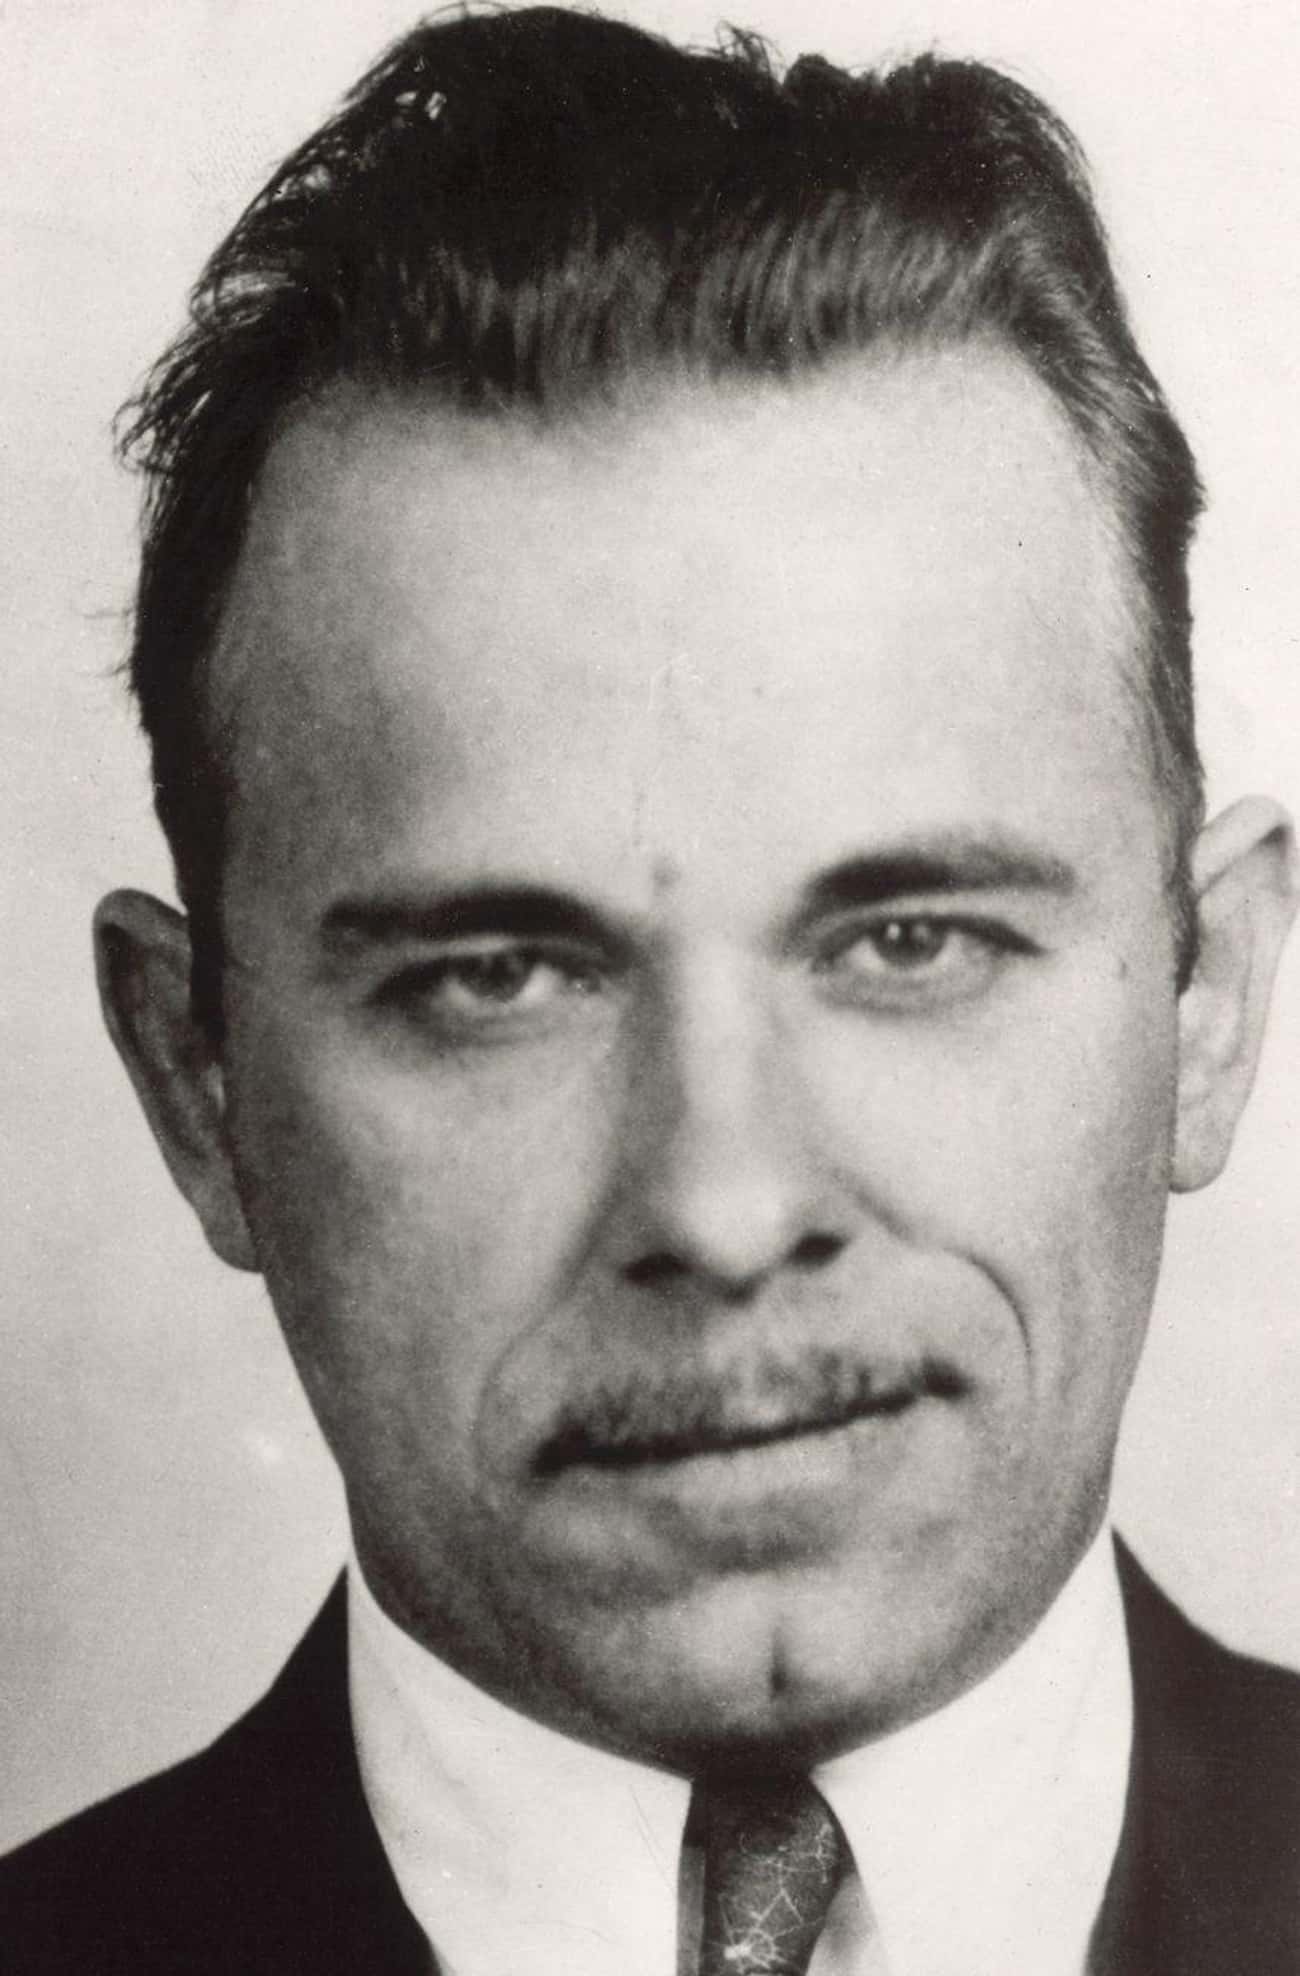 John Dillinger Once Escaped Prison Using A Block Of Wood